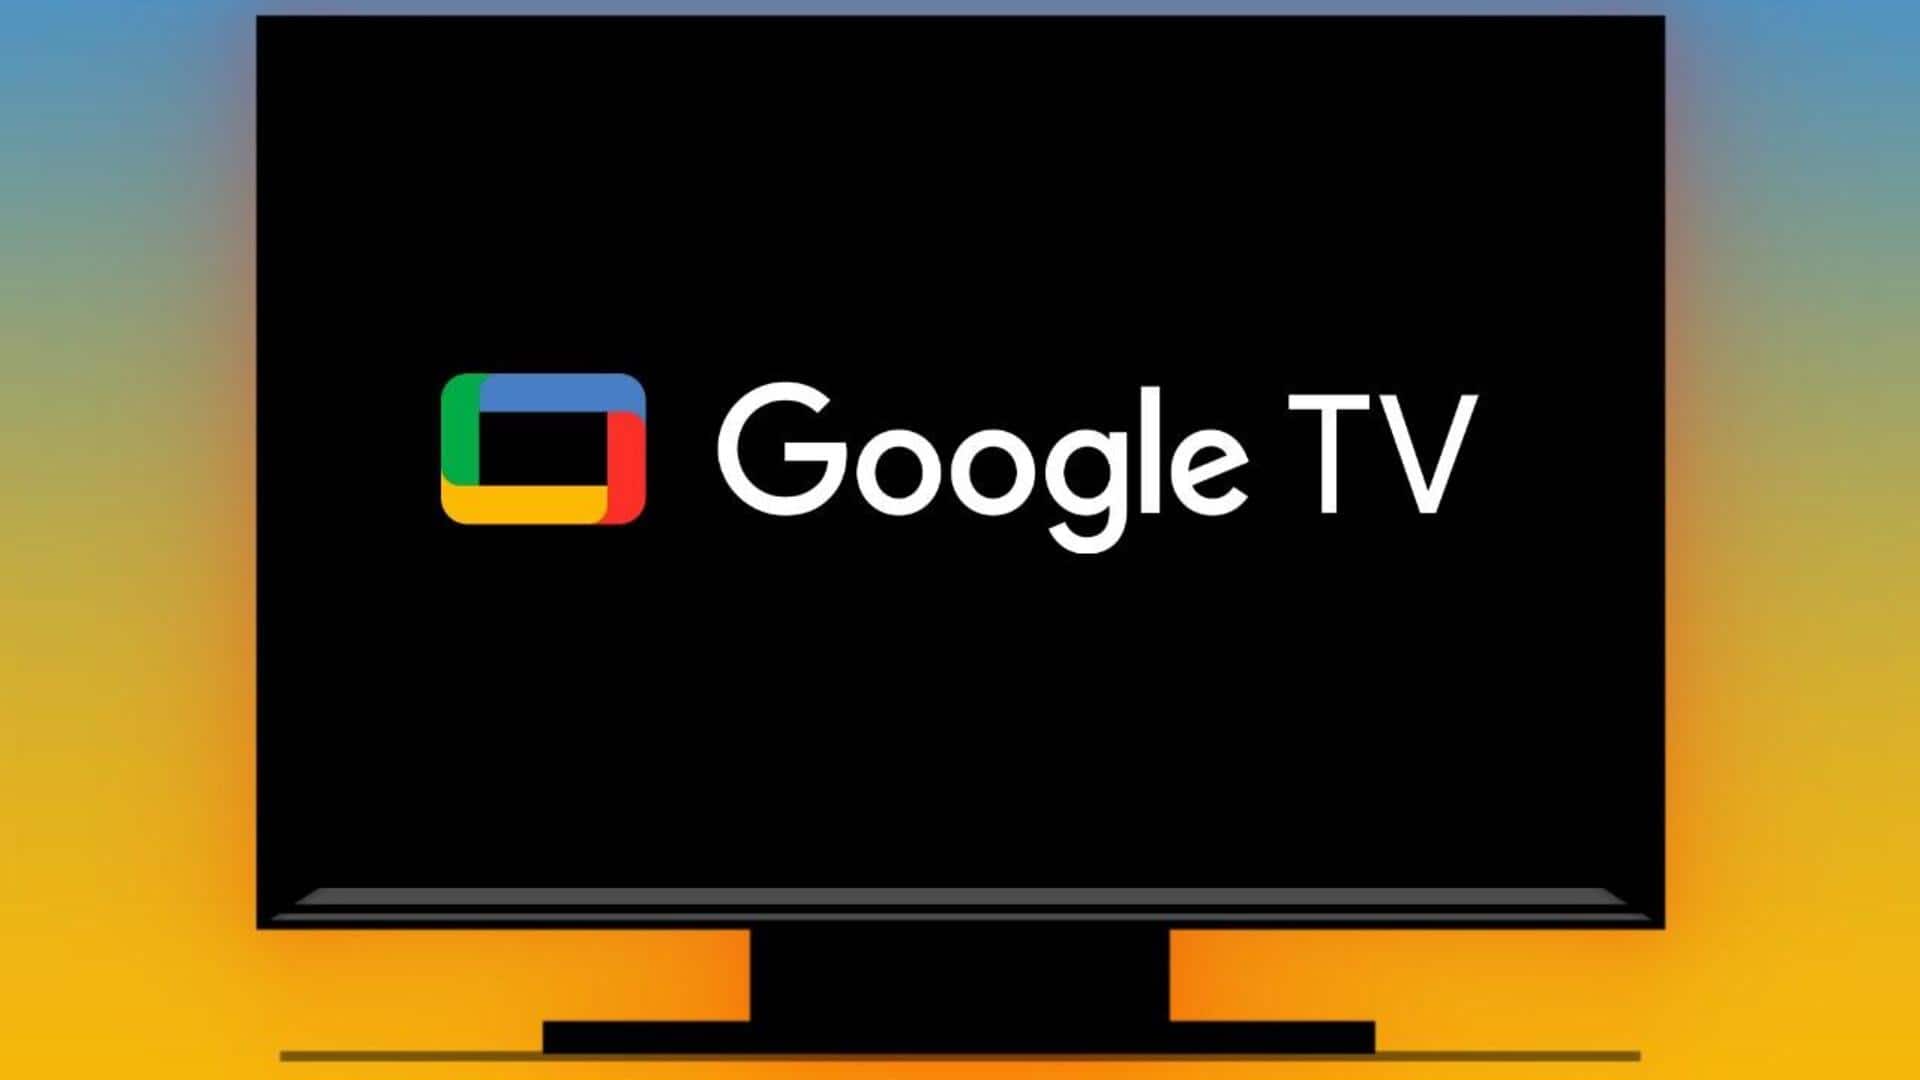 Google TV rolls out redesigned homescreen for convenience of users